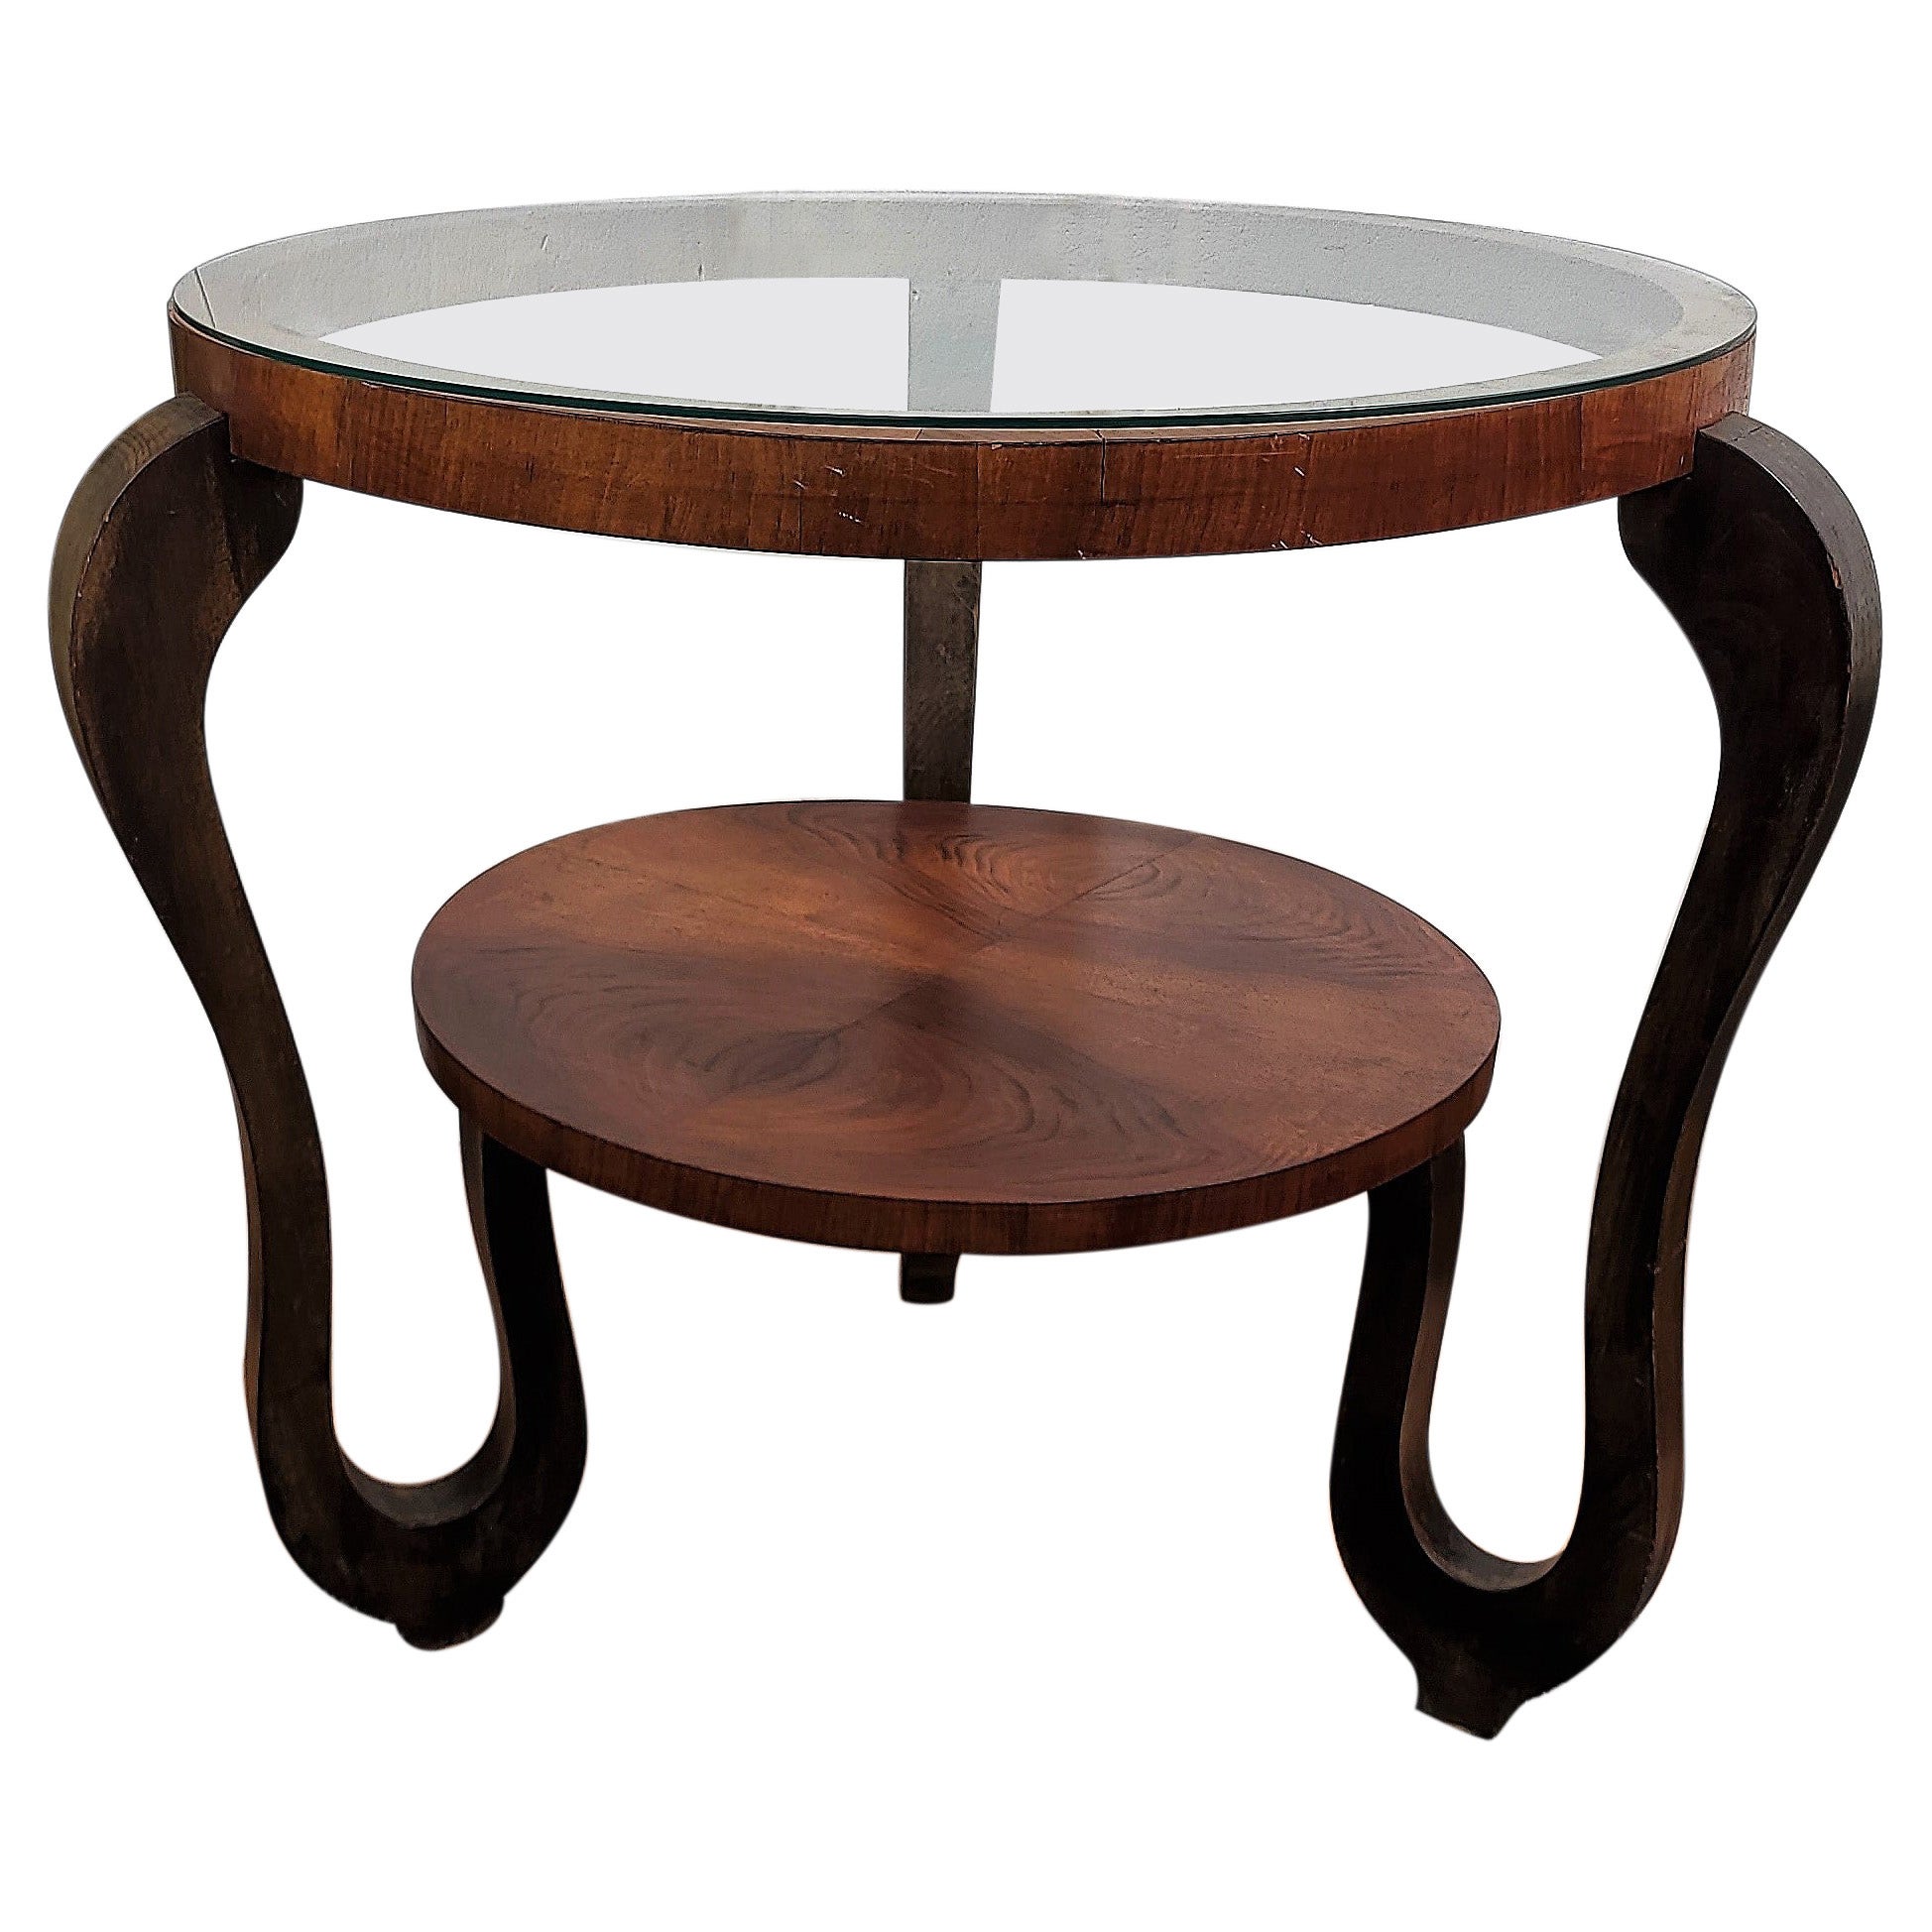 1940s Italian Briar Burl Wood and Glass Art Deco Round Center Coffee Table For Sale